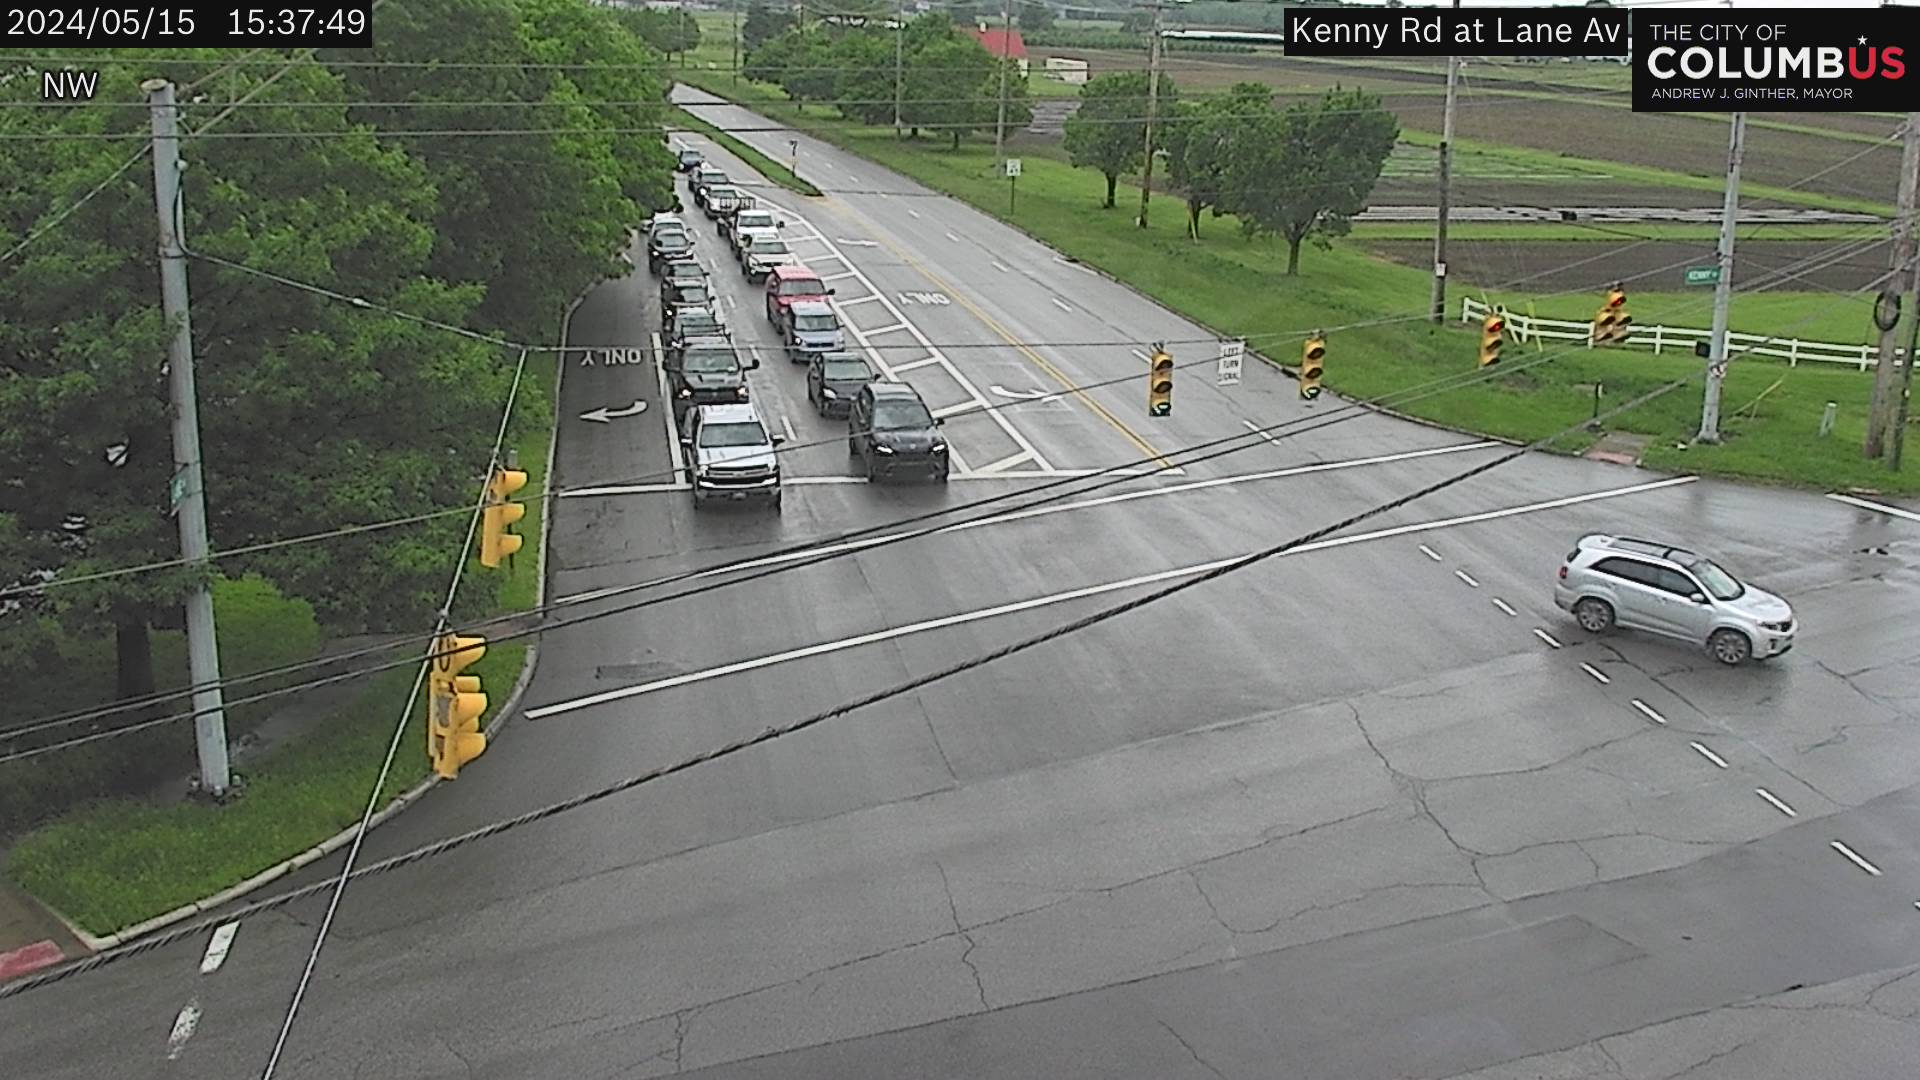 Traffic Cam Lane Ave at Kenny Rd